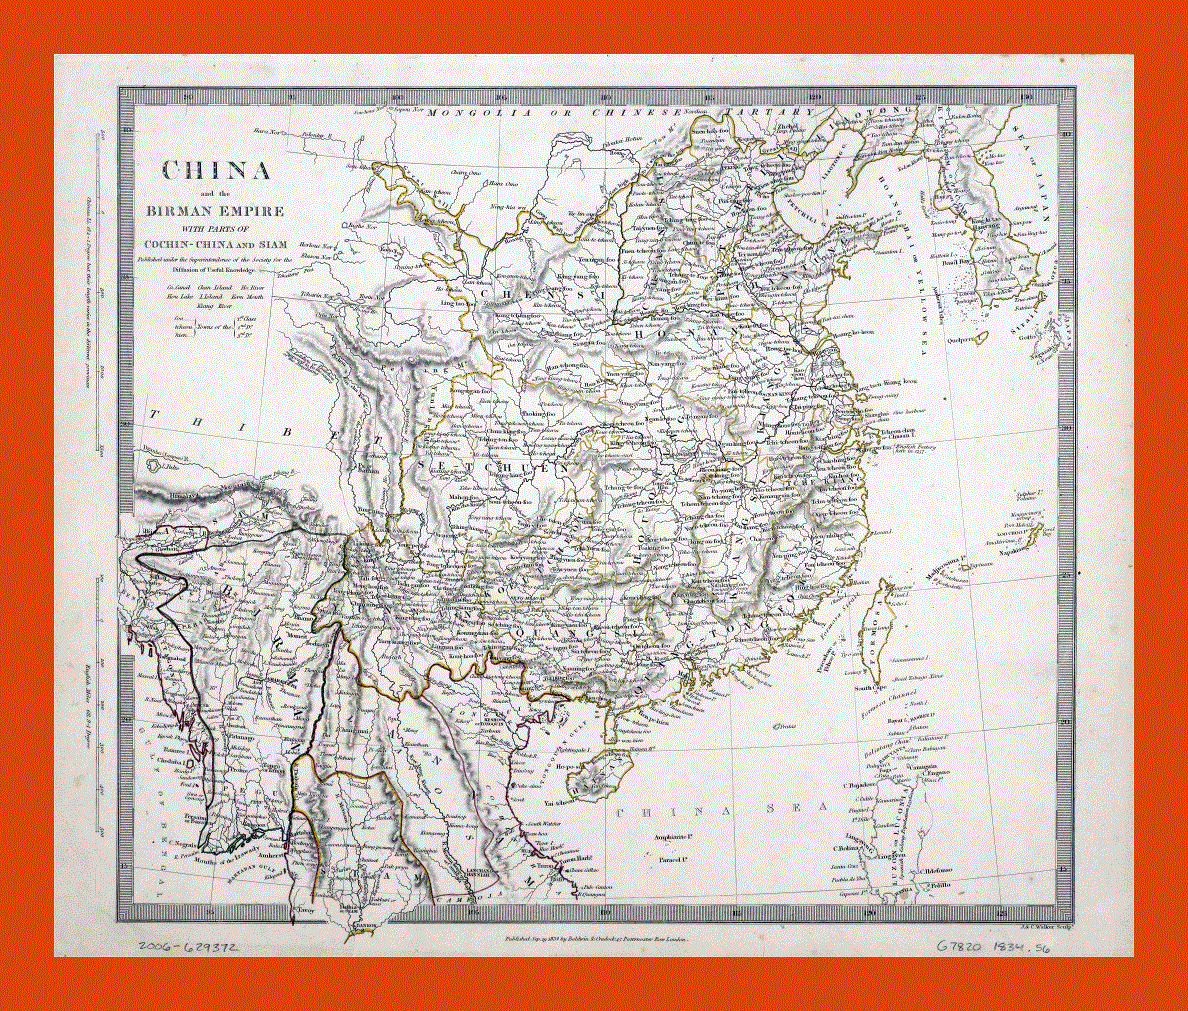 Old map of China and the Birman Empire - 1834